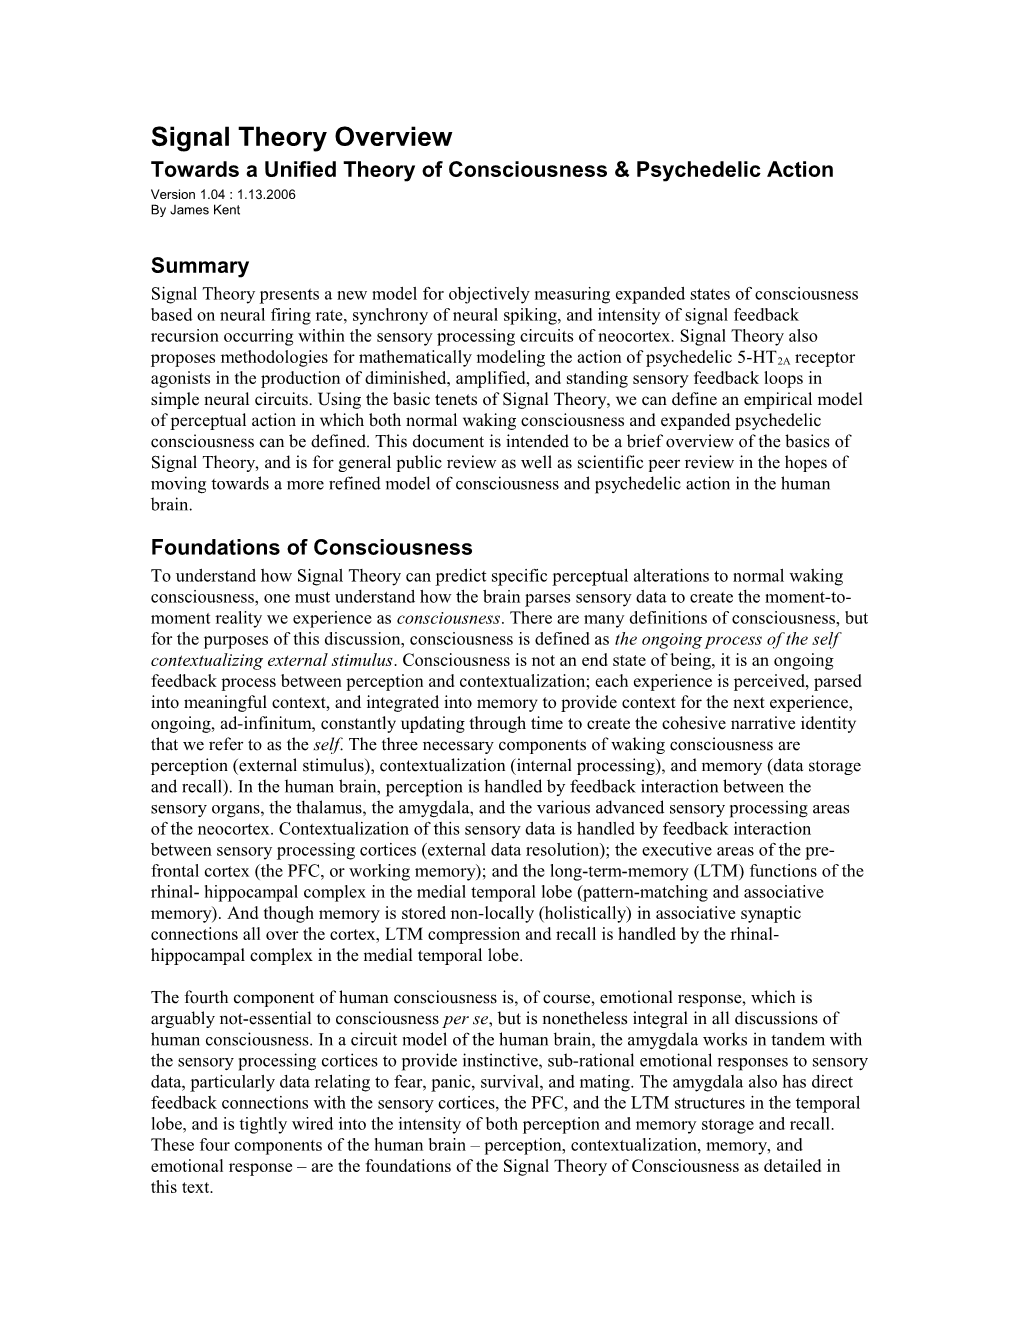 Towards a Unified Theory of Consciousness & Psychedelic Action